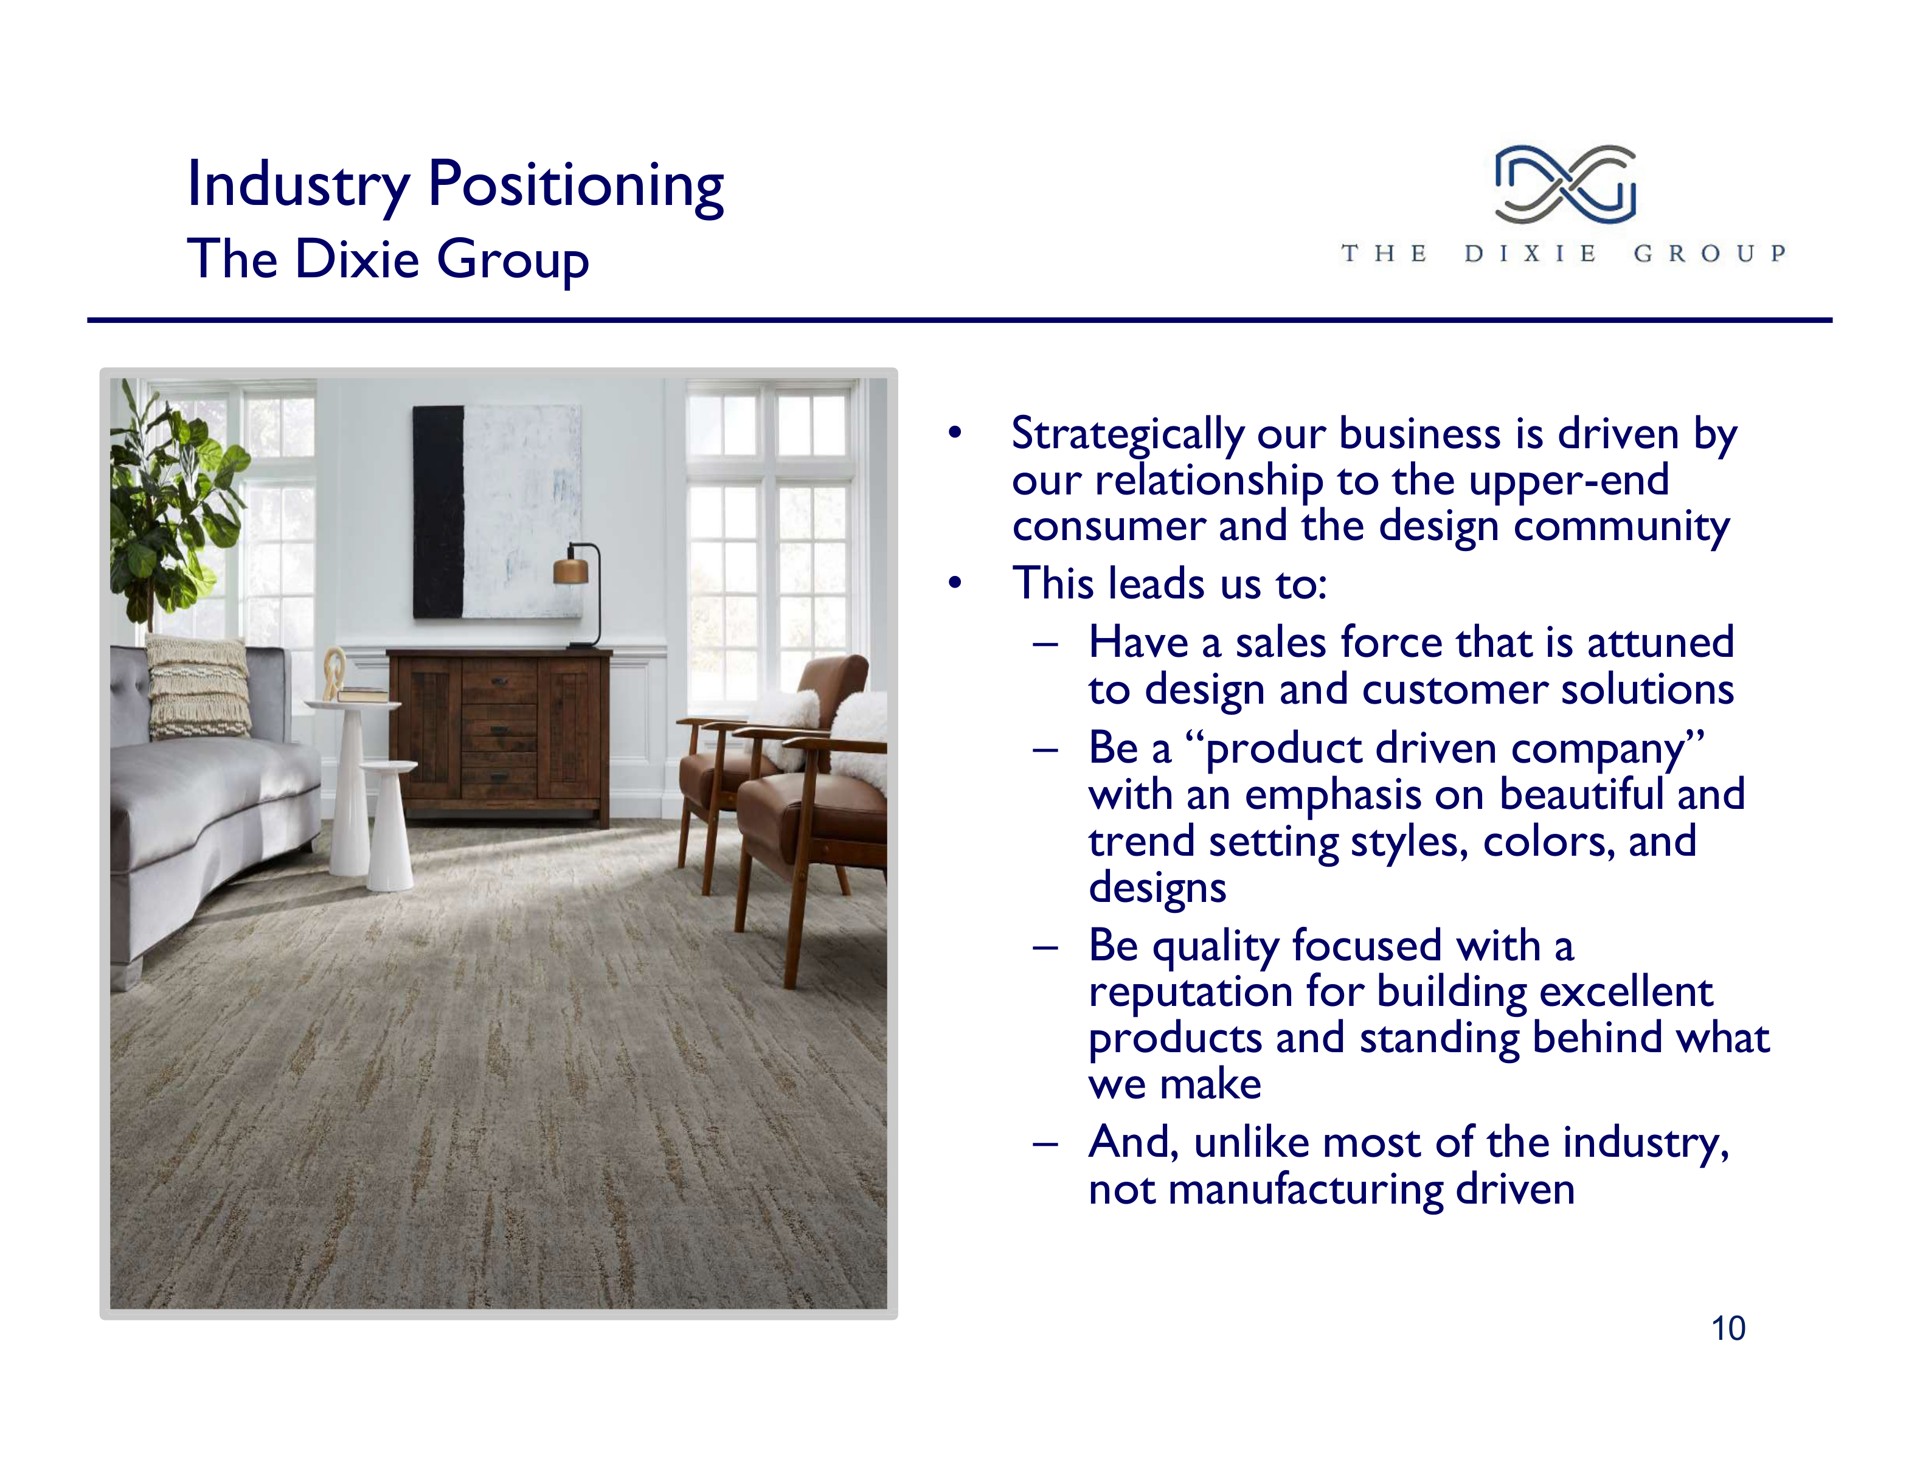 industry positioning the dixie group | The Dixie Group